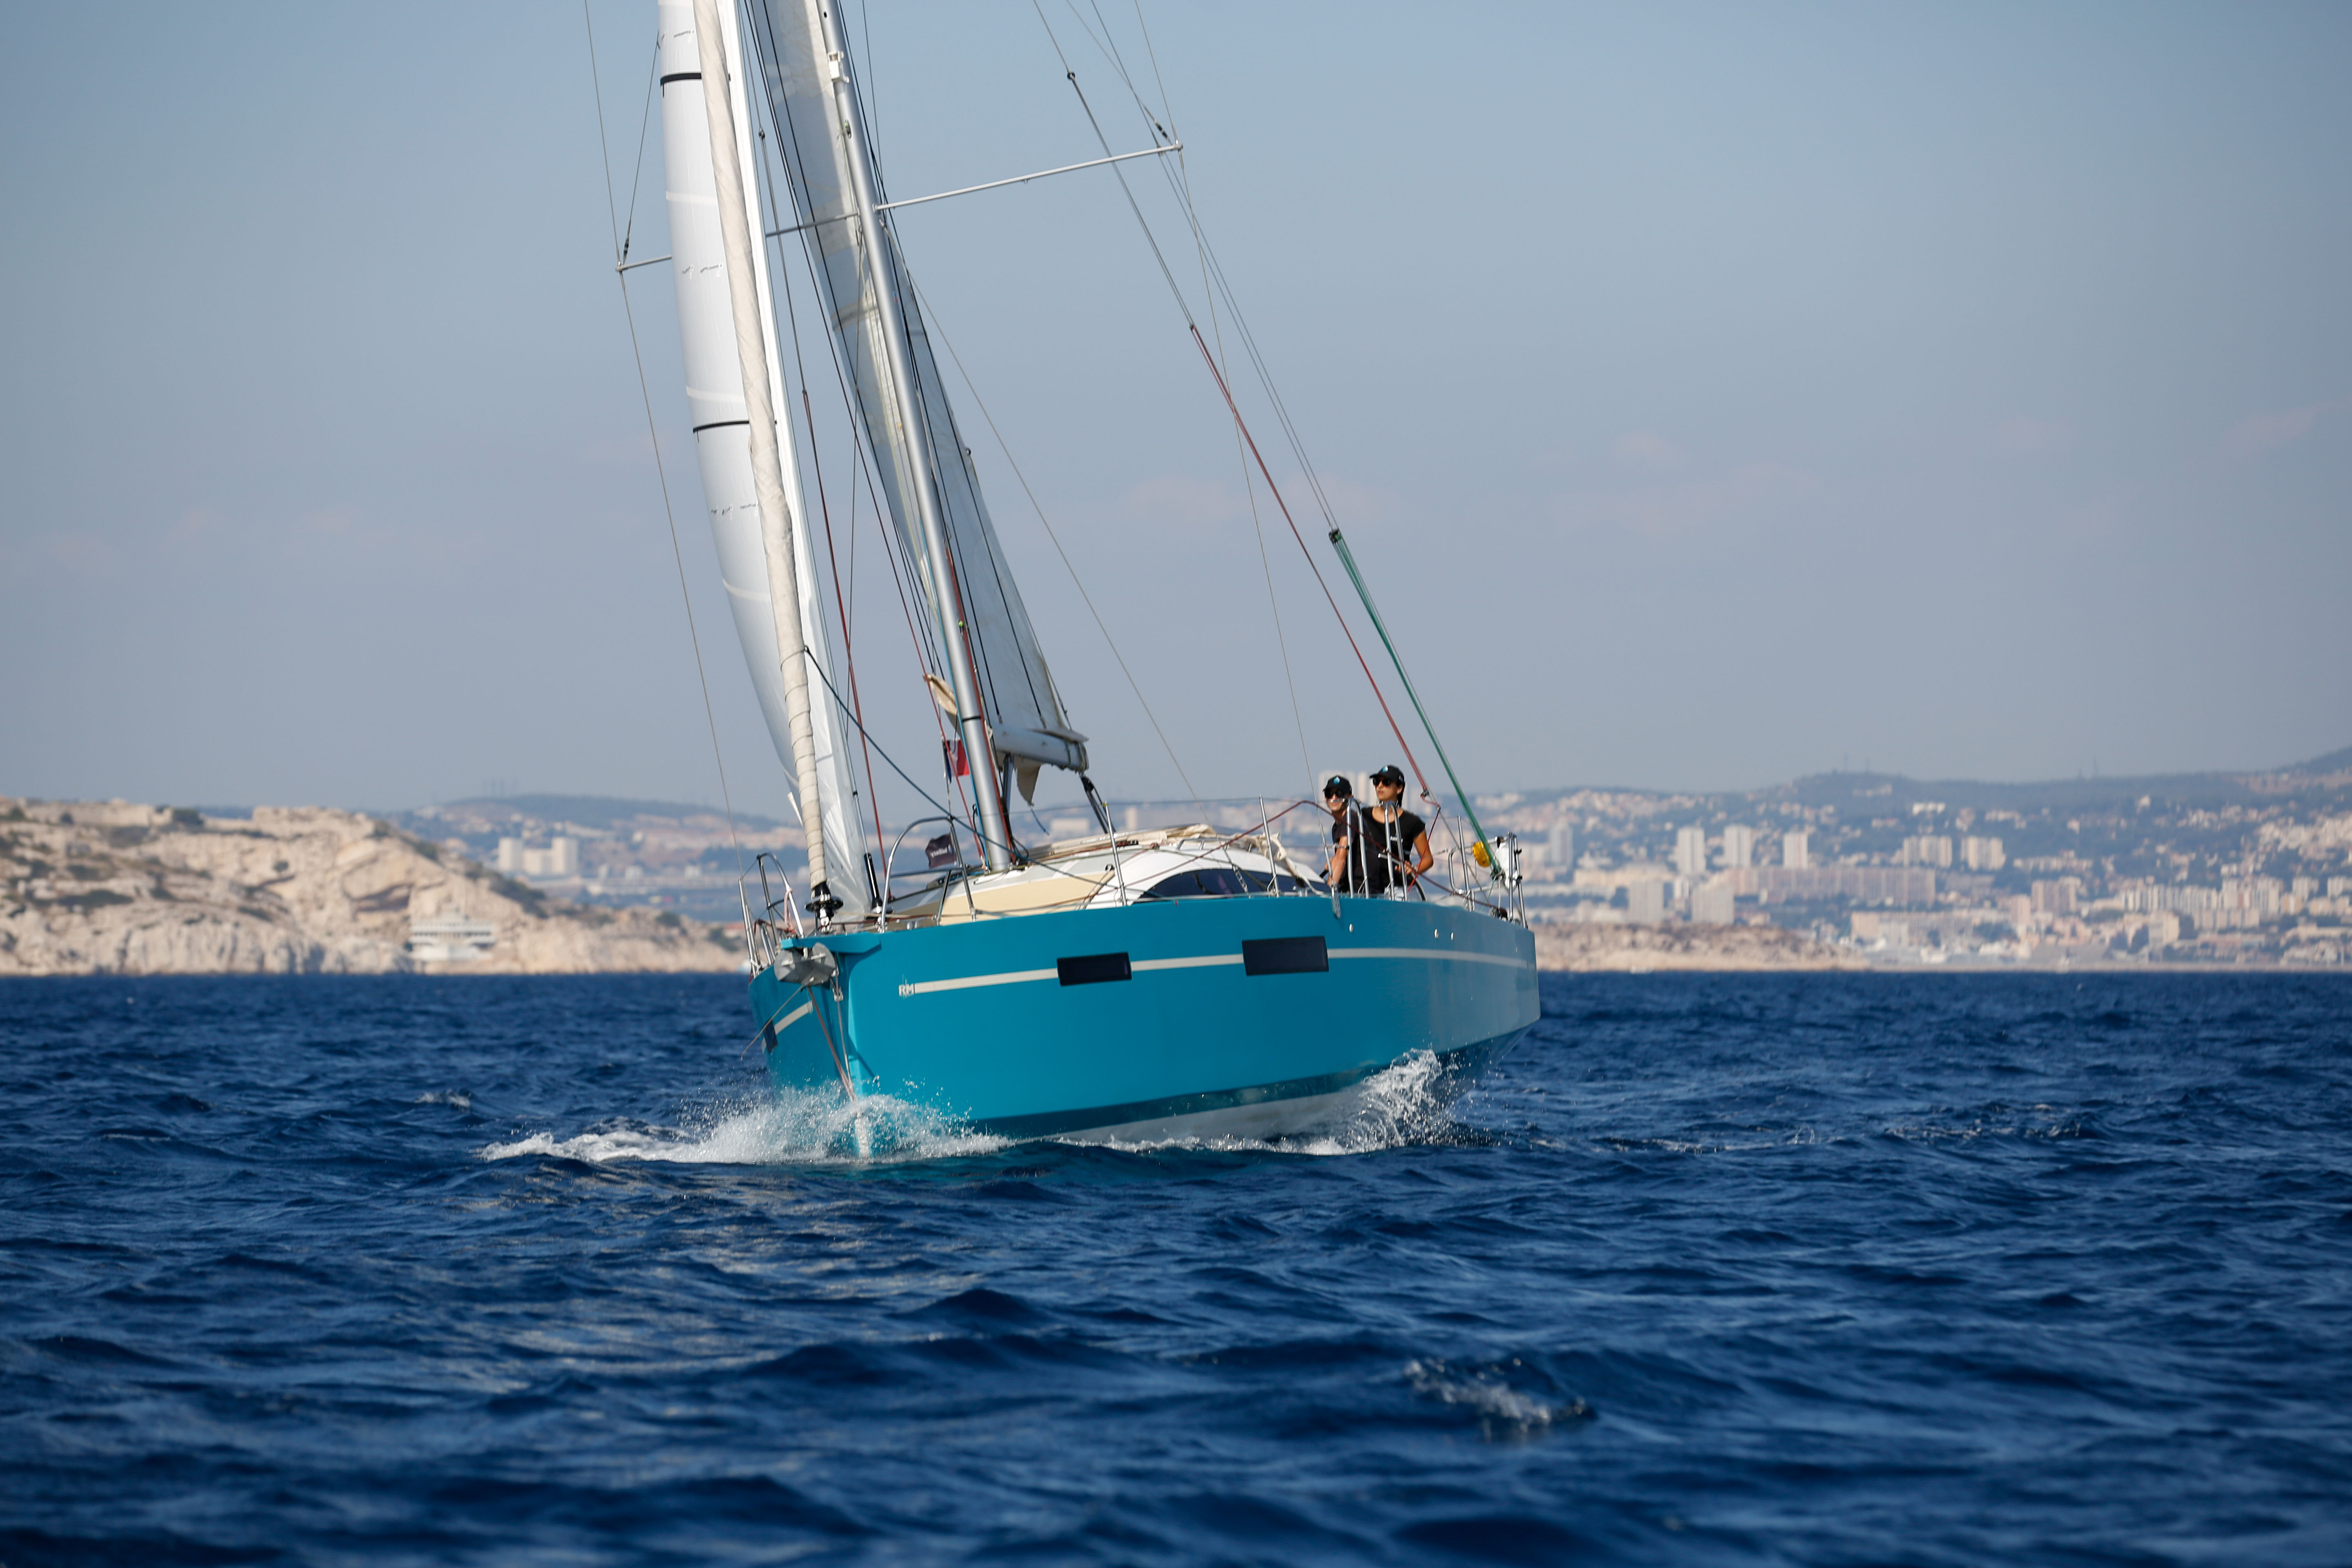 RM 1070 - Luxury yacht charter France & Boat hire in France French Riviera Marseille Marseille Marina Vieux Port 6